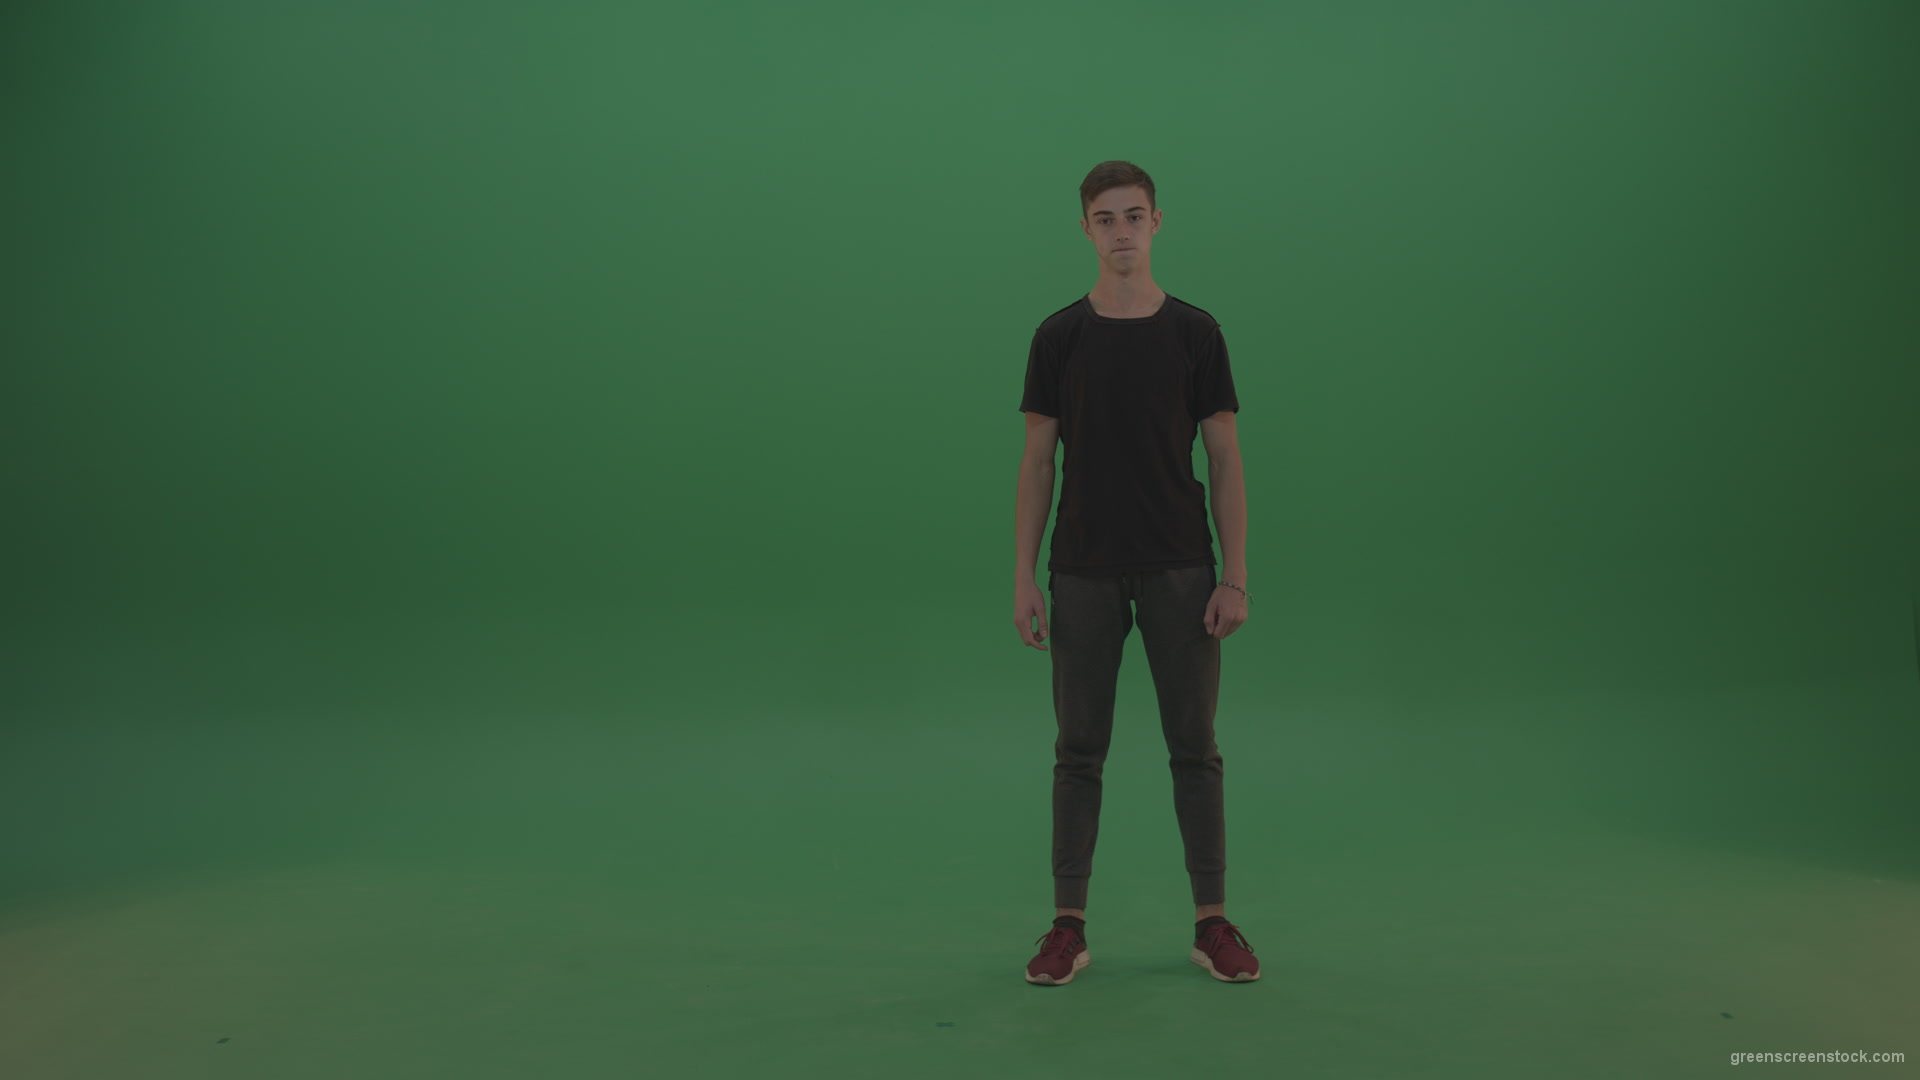 Young_Brunette_Sportsman_Wearing_Dark_Clothes_Doing_Side_Flip_On_Green_Screen_Wall_Background_001 Green Screen Stock